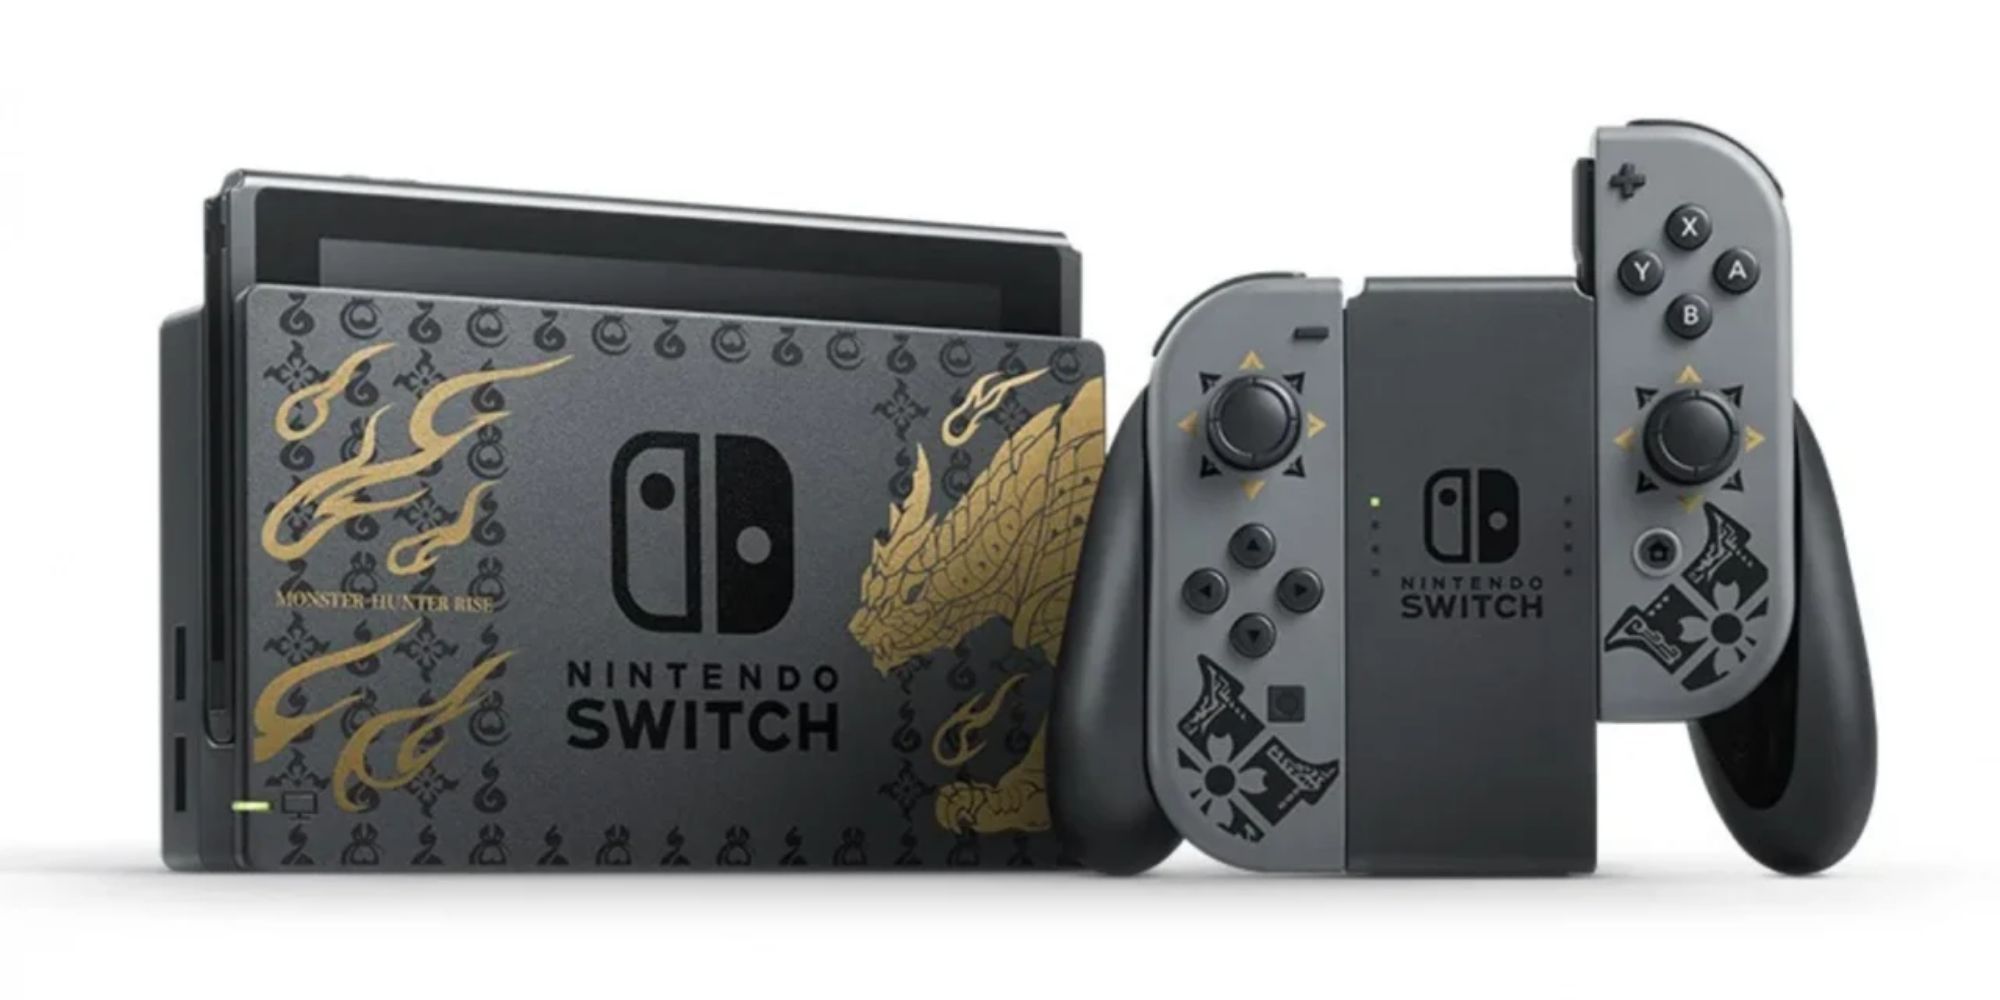 A Nintendo Switch console with gold and black designs on a white back ground for Monster Hunter Rise